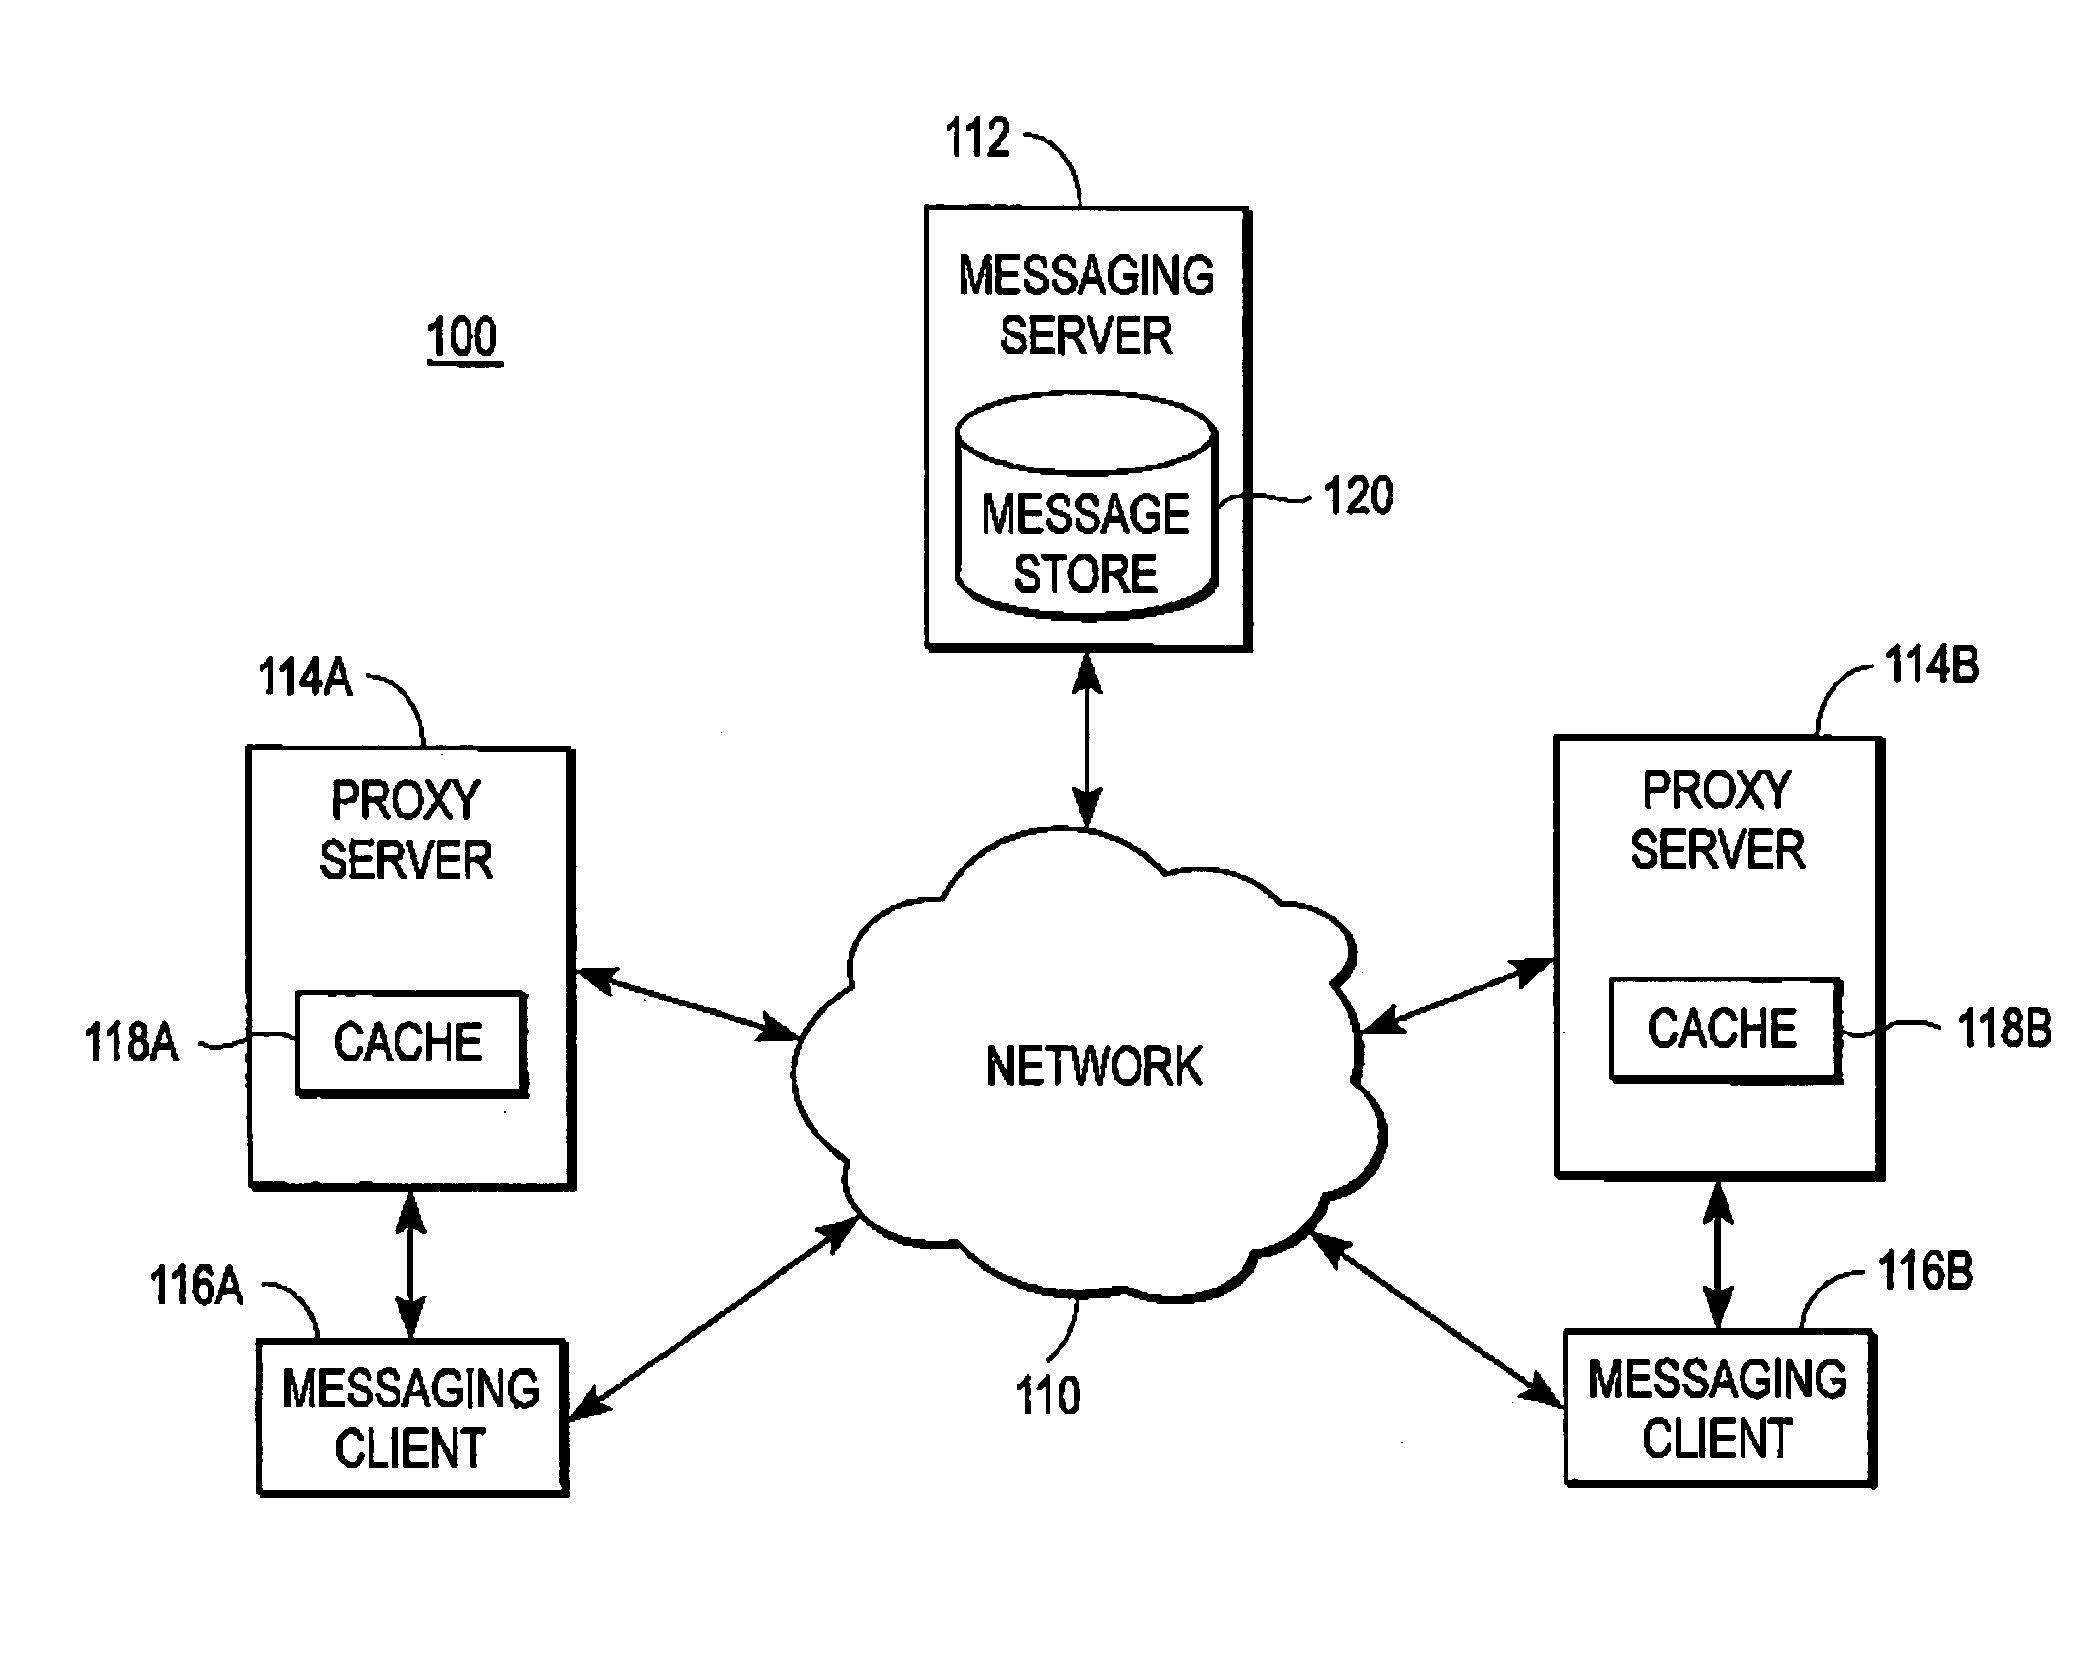 Enforcing compliance policies in a messaging system